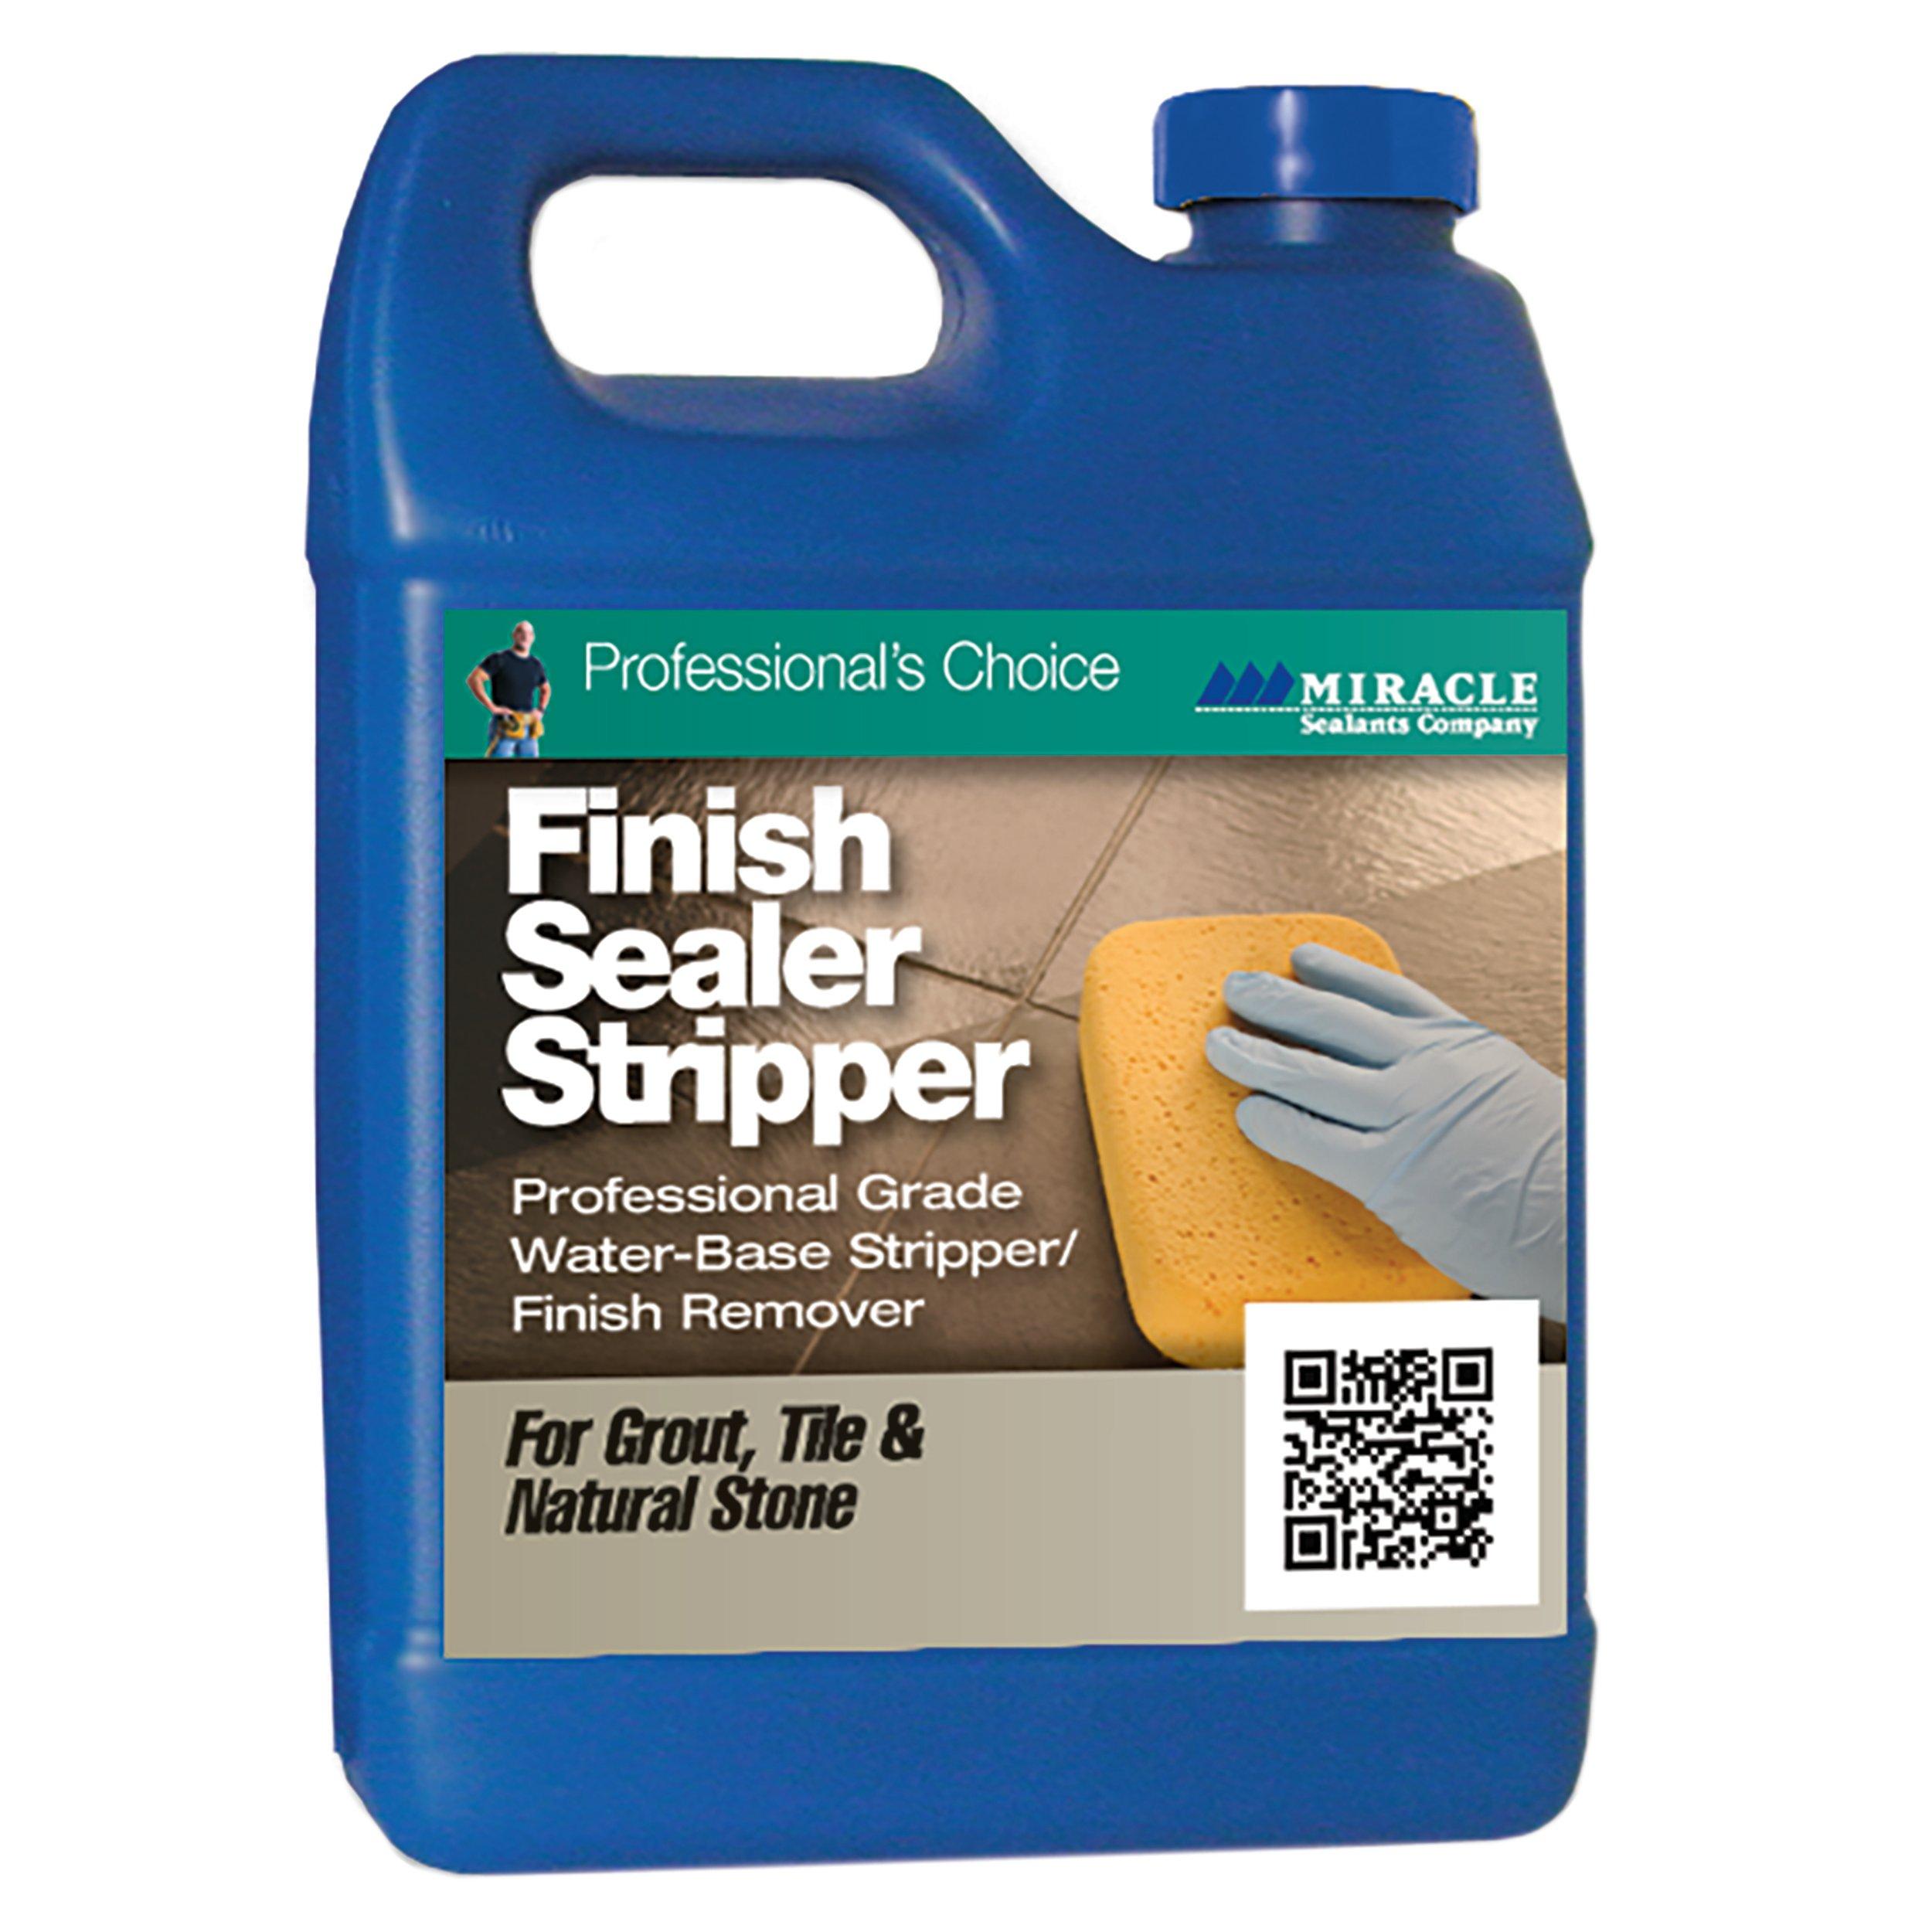 Miracle Finish Sealer Stripper